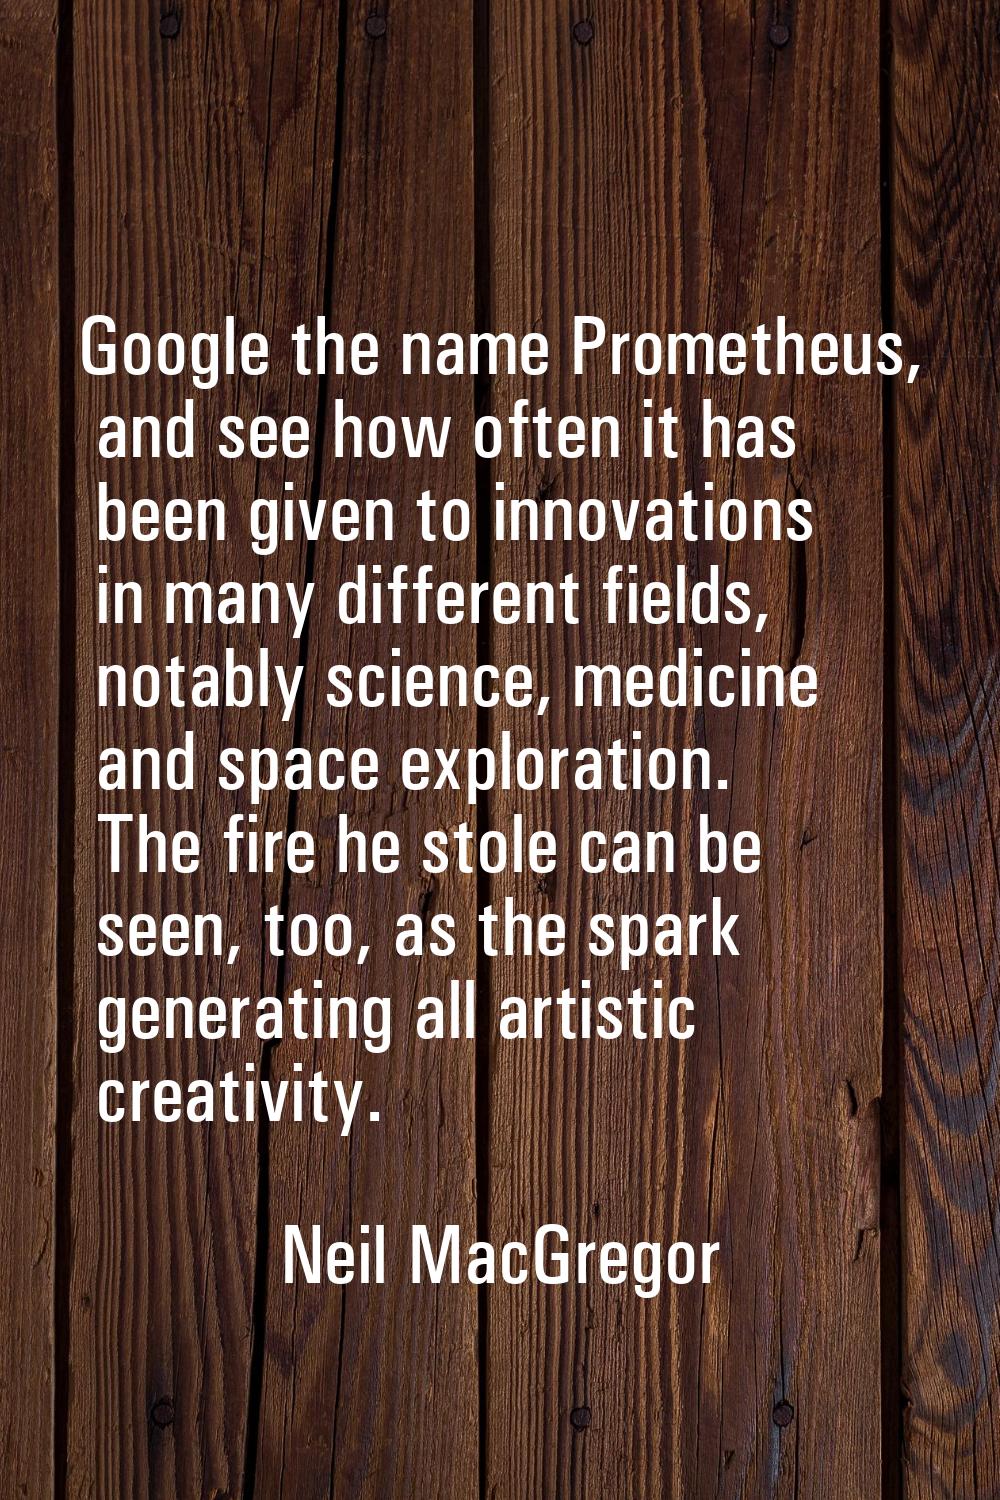 Google the name Prometheus, and see how often it has been given to innovations in many different fi